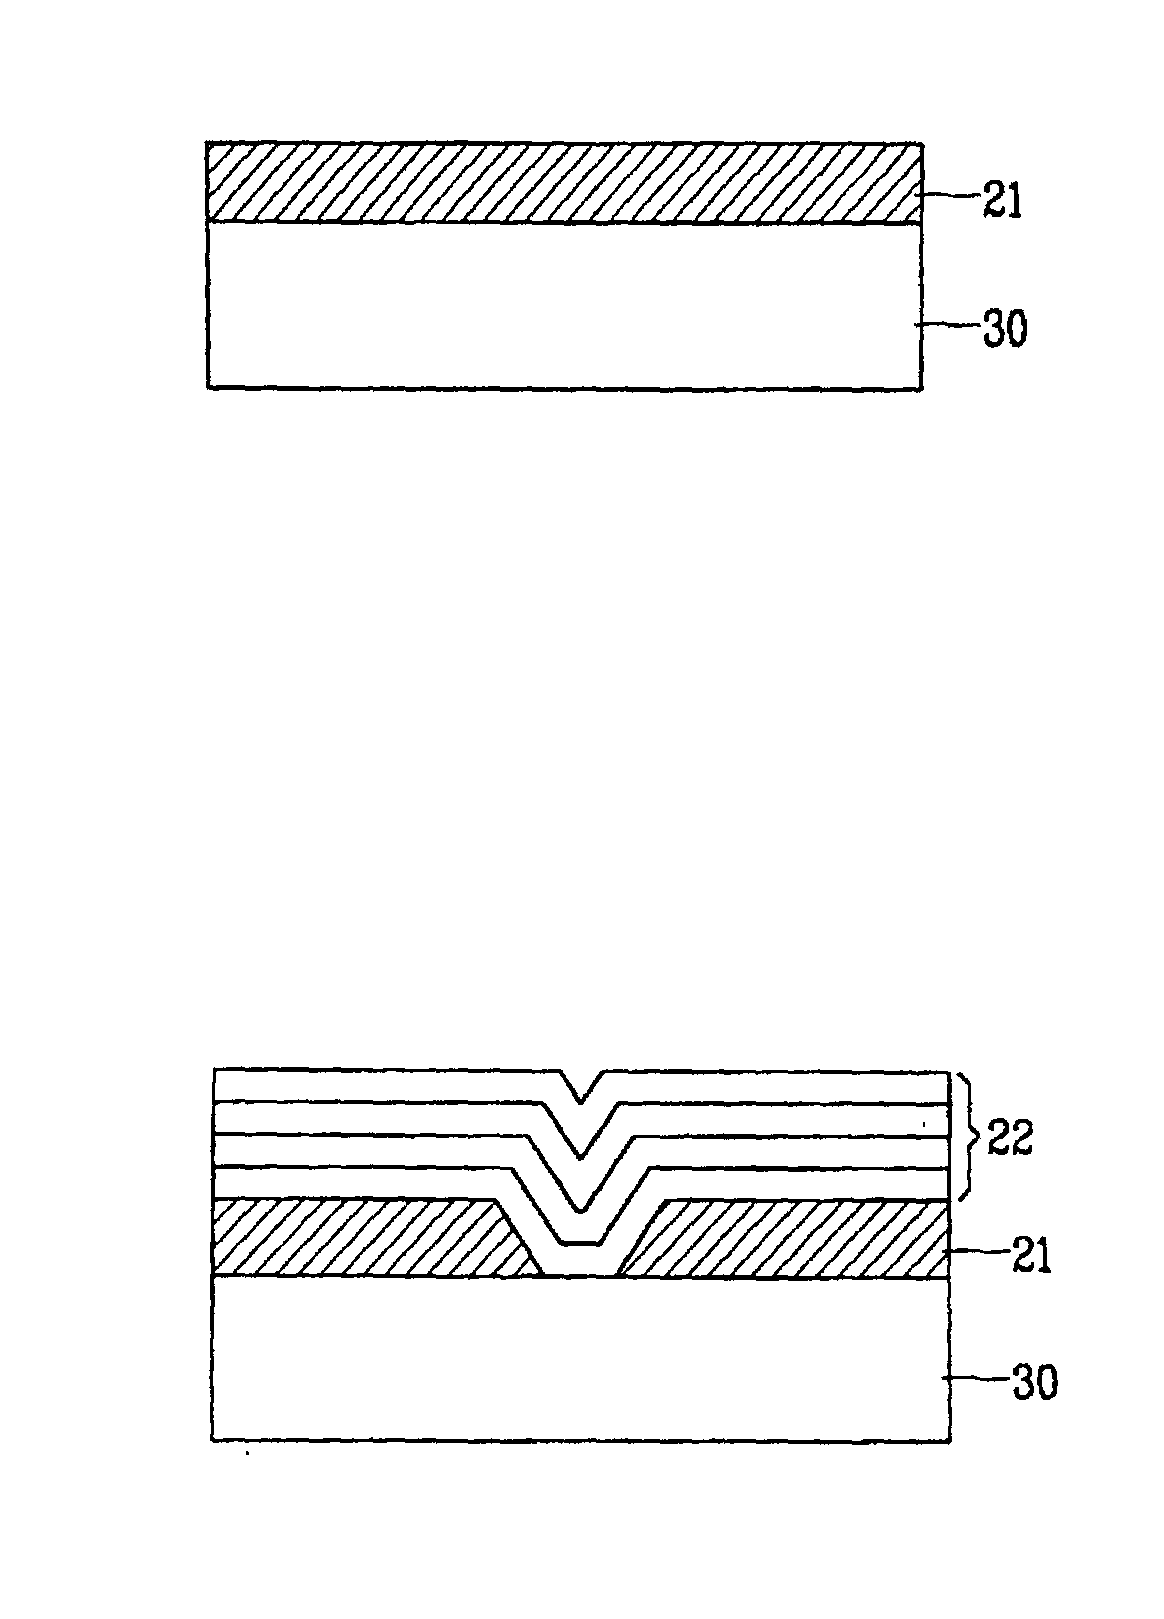 Method of fusion for heteroepitaxial layers and overgrowth thereon